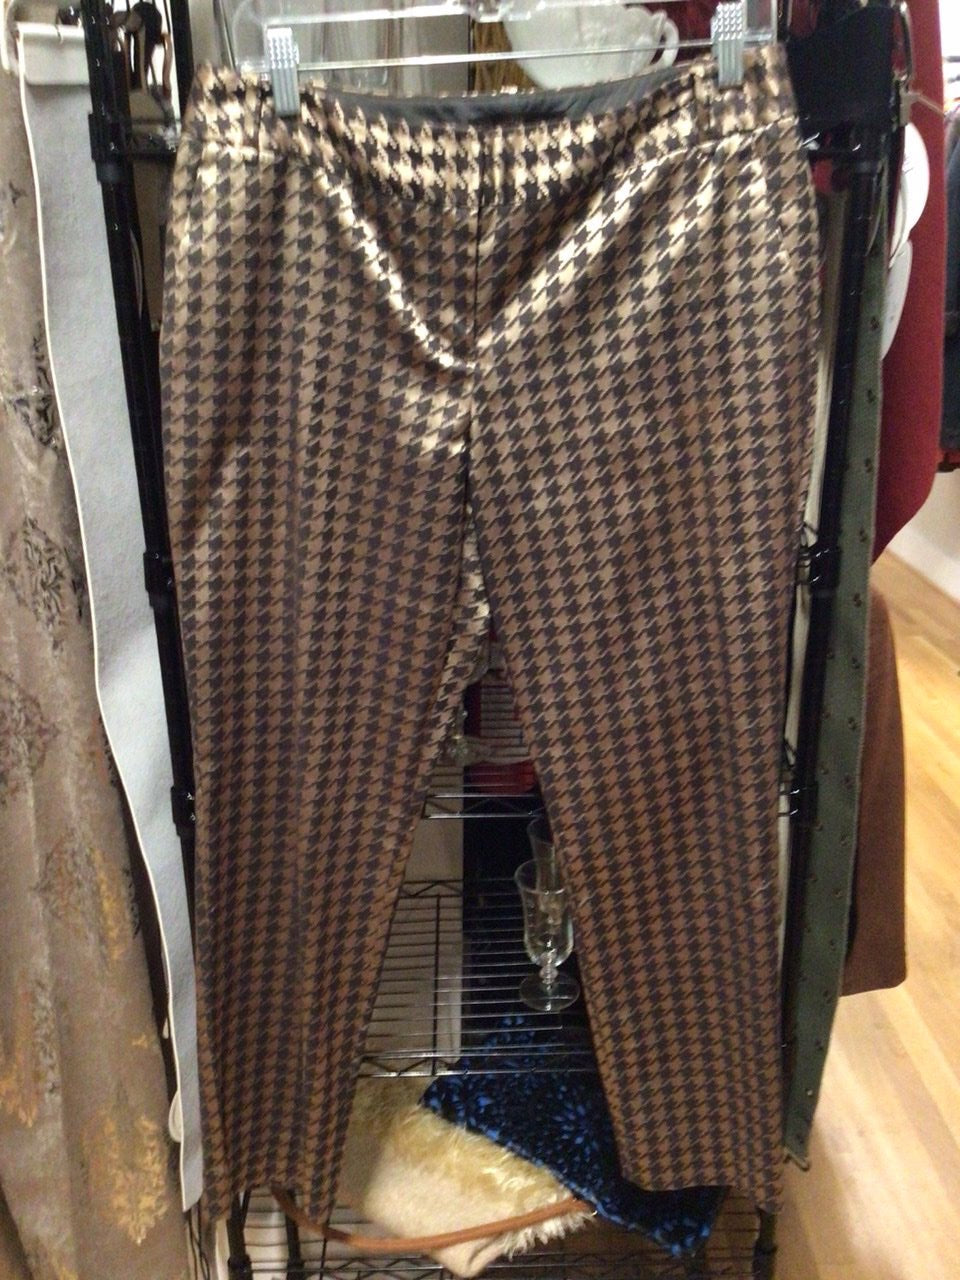 THE LIMITED TROUSERS, size 8  #1146